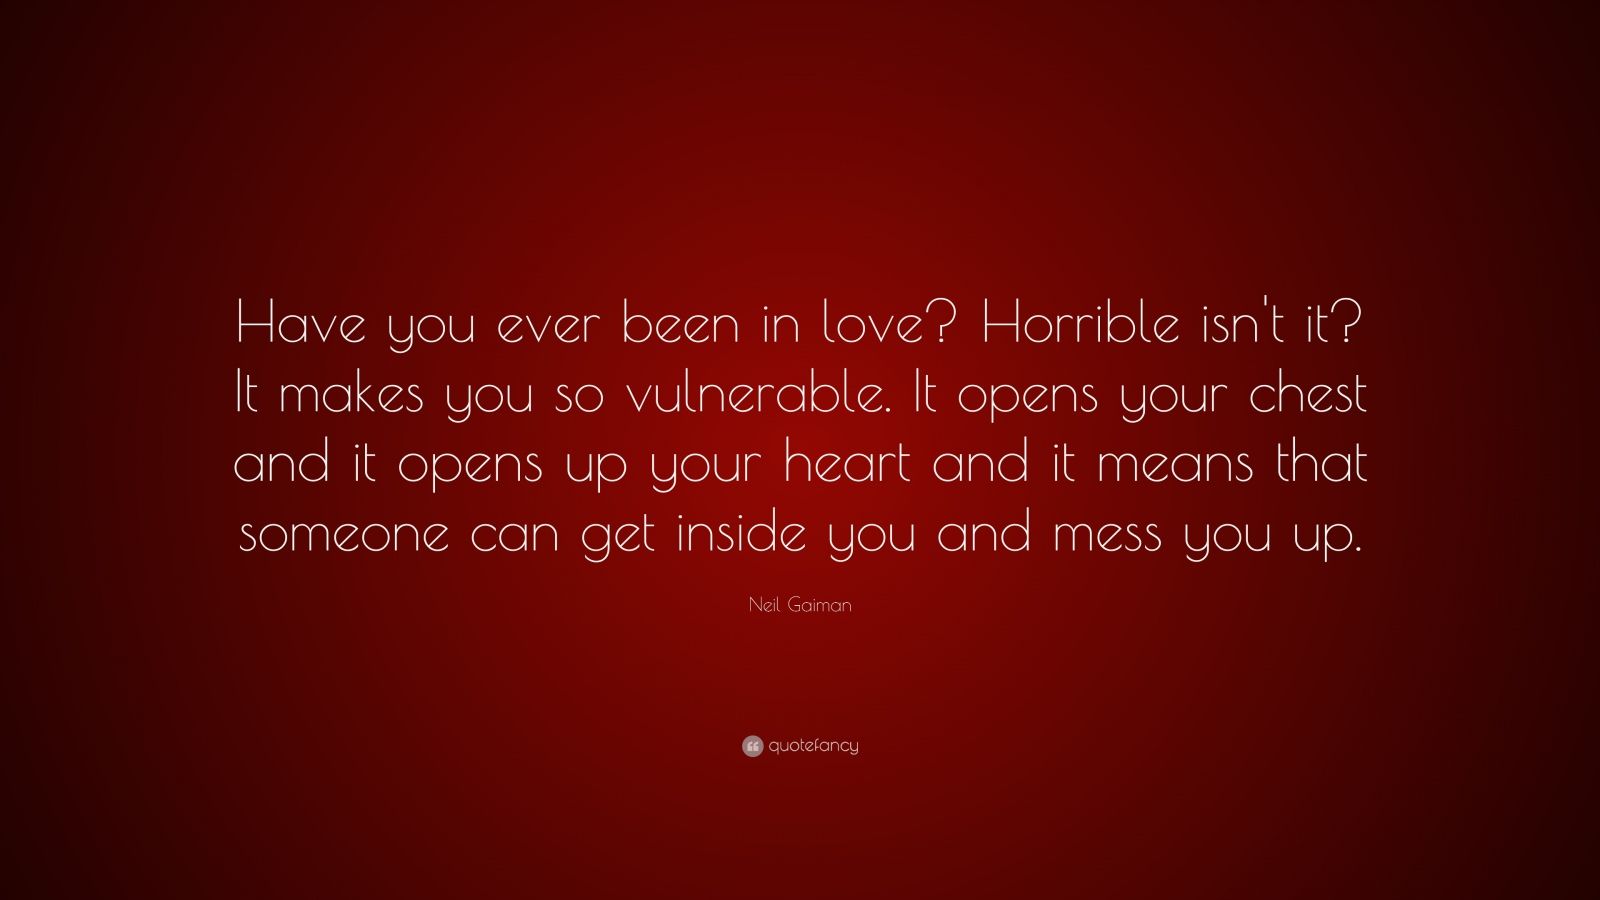 Neil Gaiman Quote “Have you ever been in love Horrible isn t